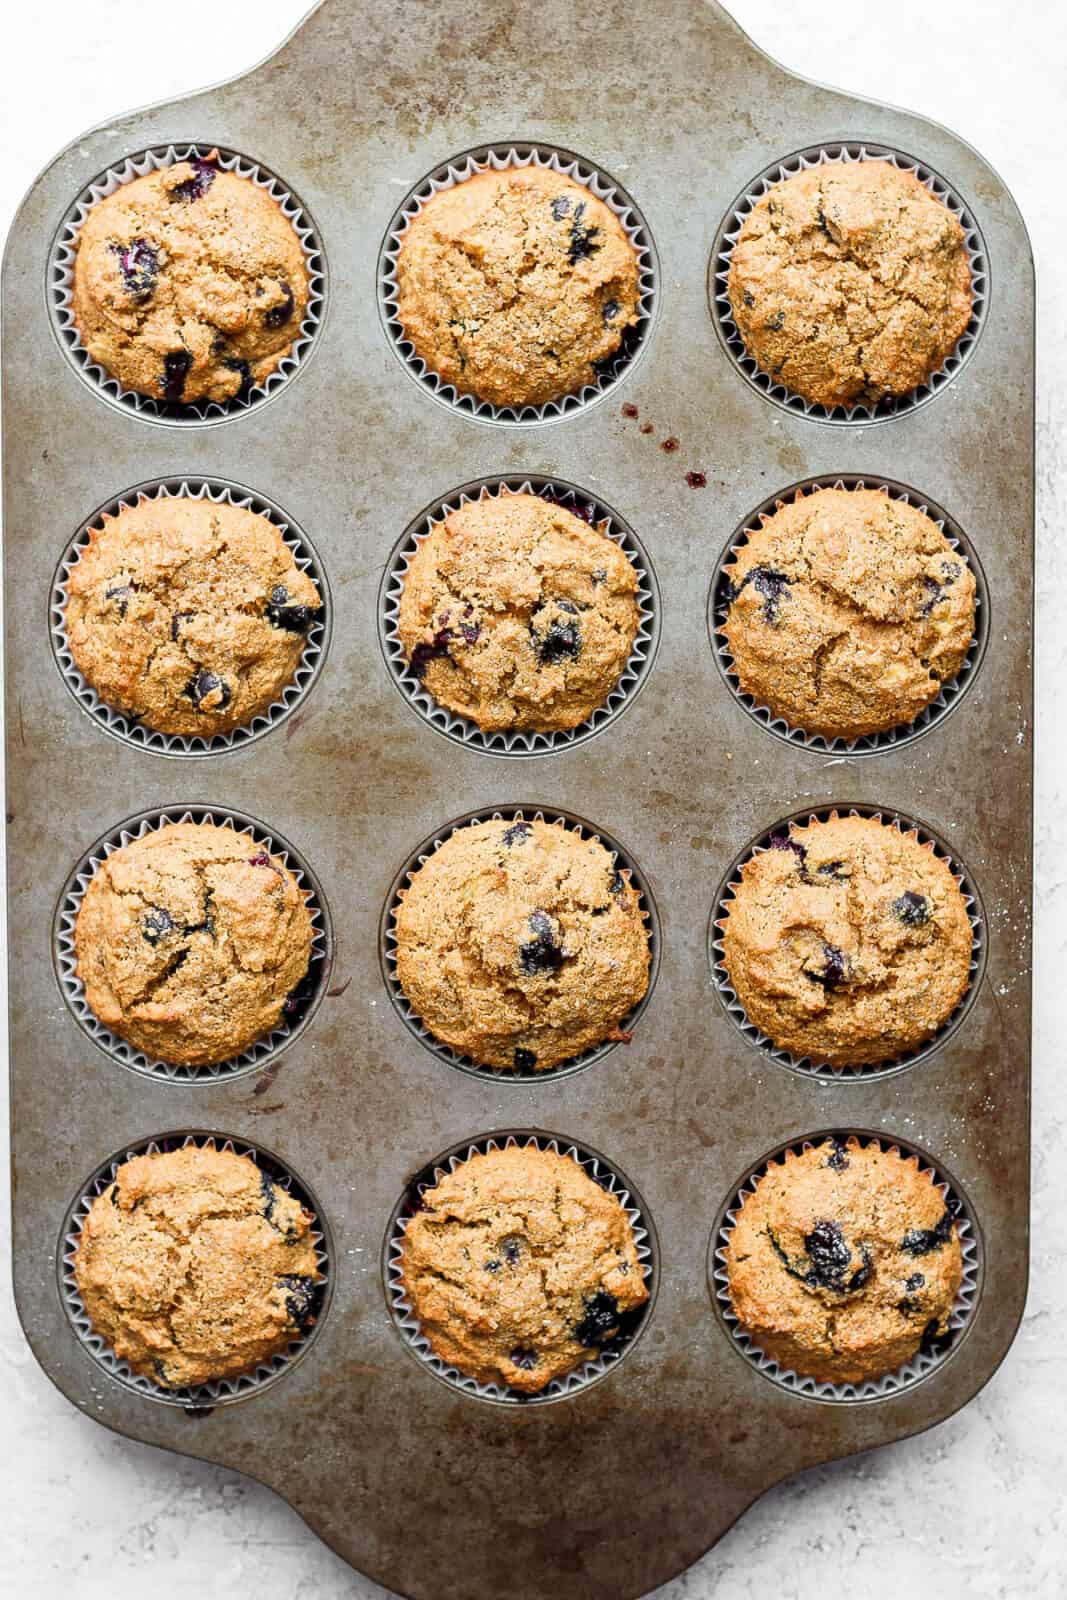 Fully baked blueberry banana muffins in a muffin tin.